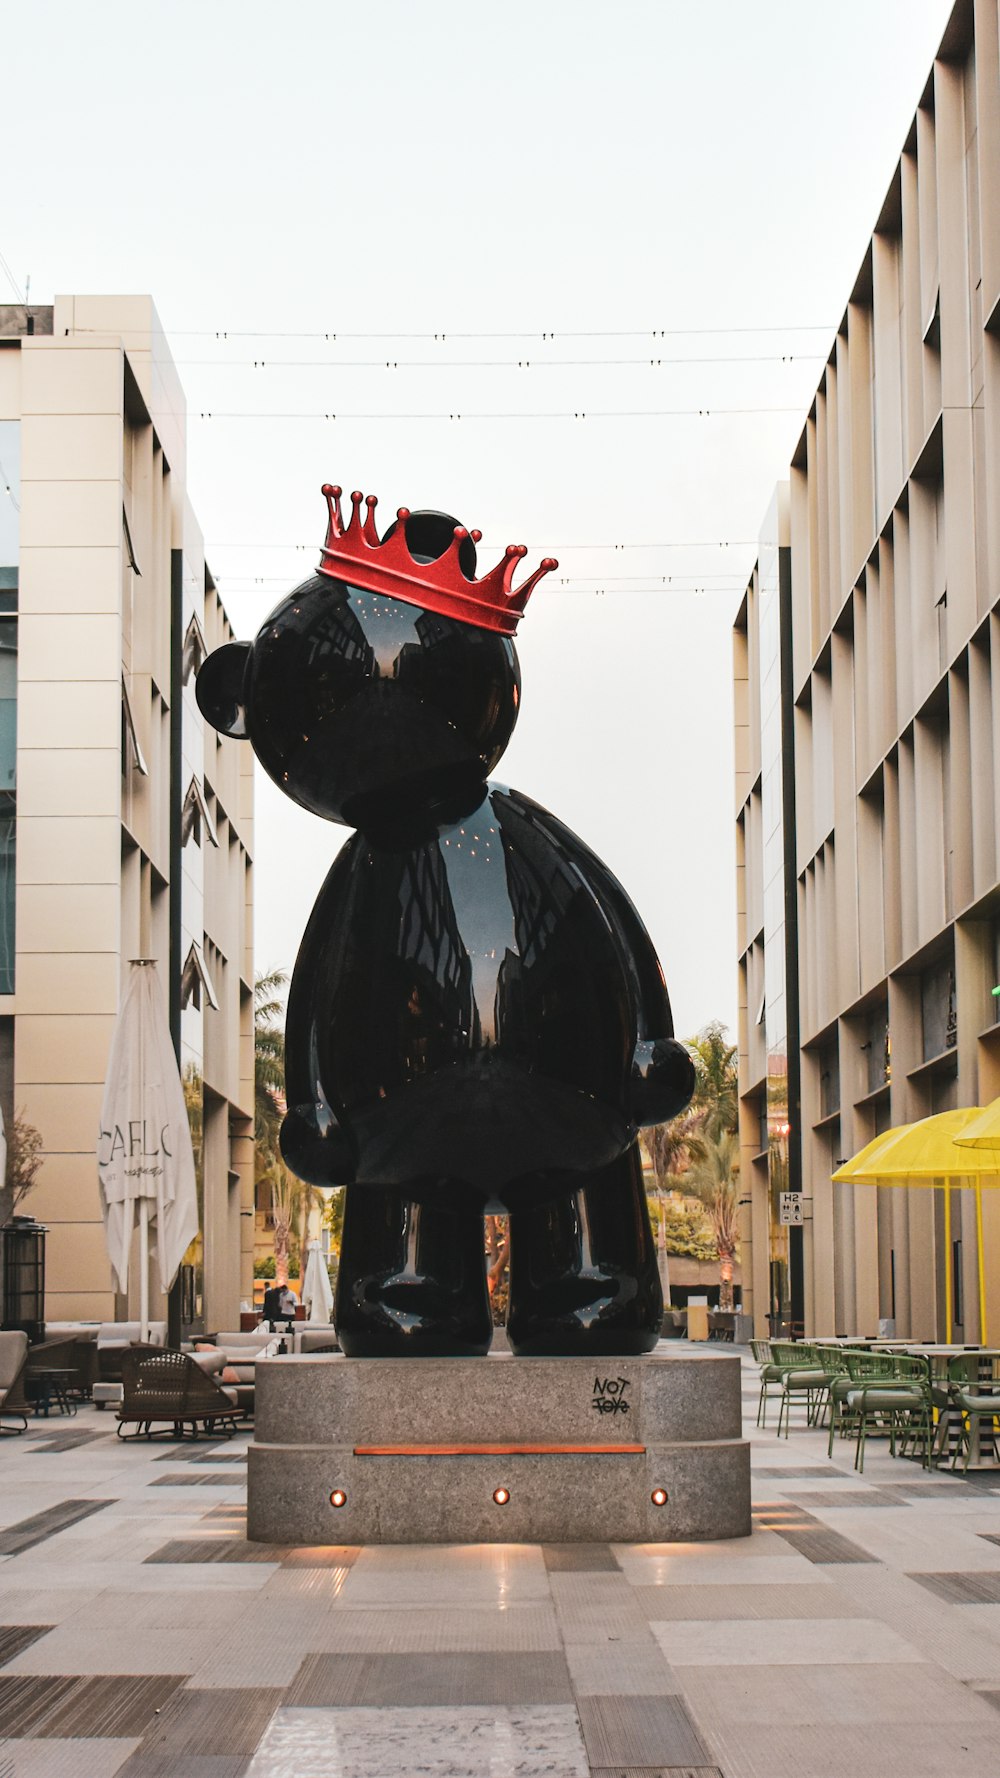 a statue of a bear with a crown on its head